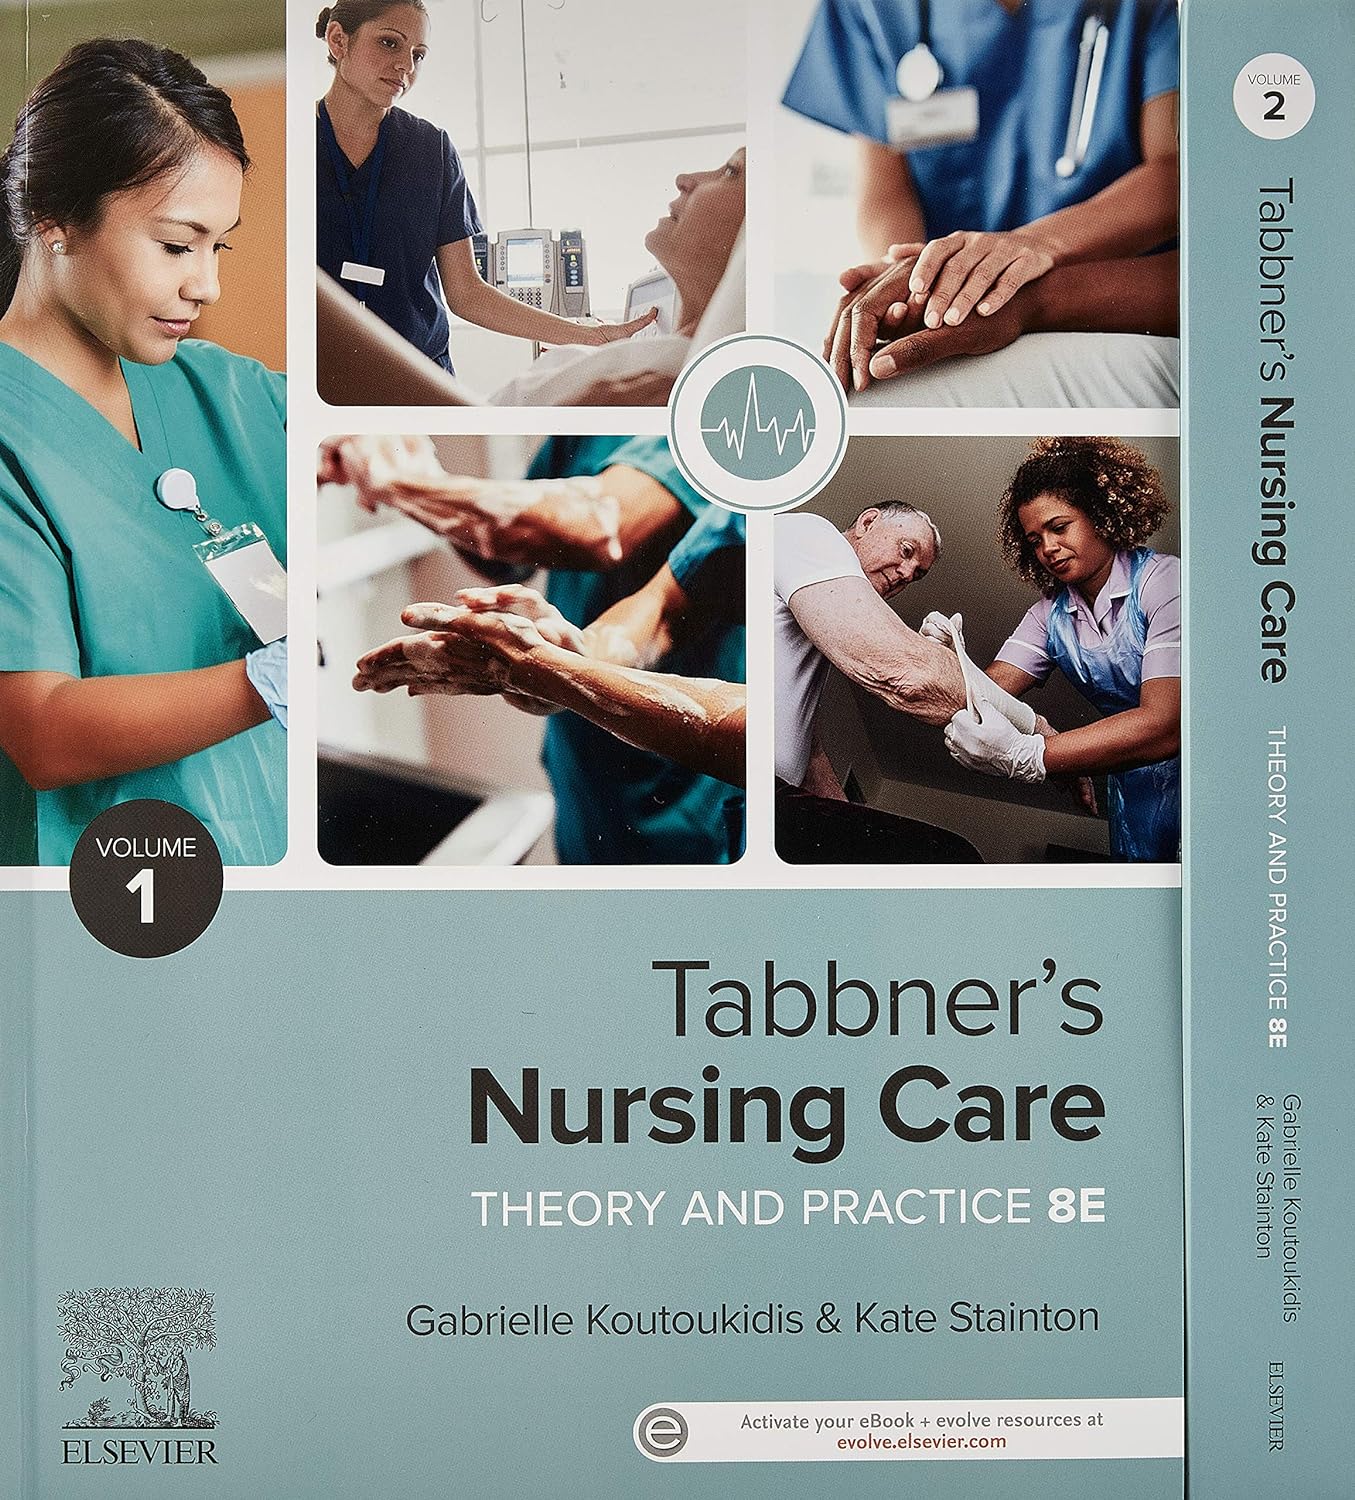 Tabbner's Nursing Care: Theory and Practice (8th Edition) - eBook